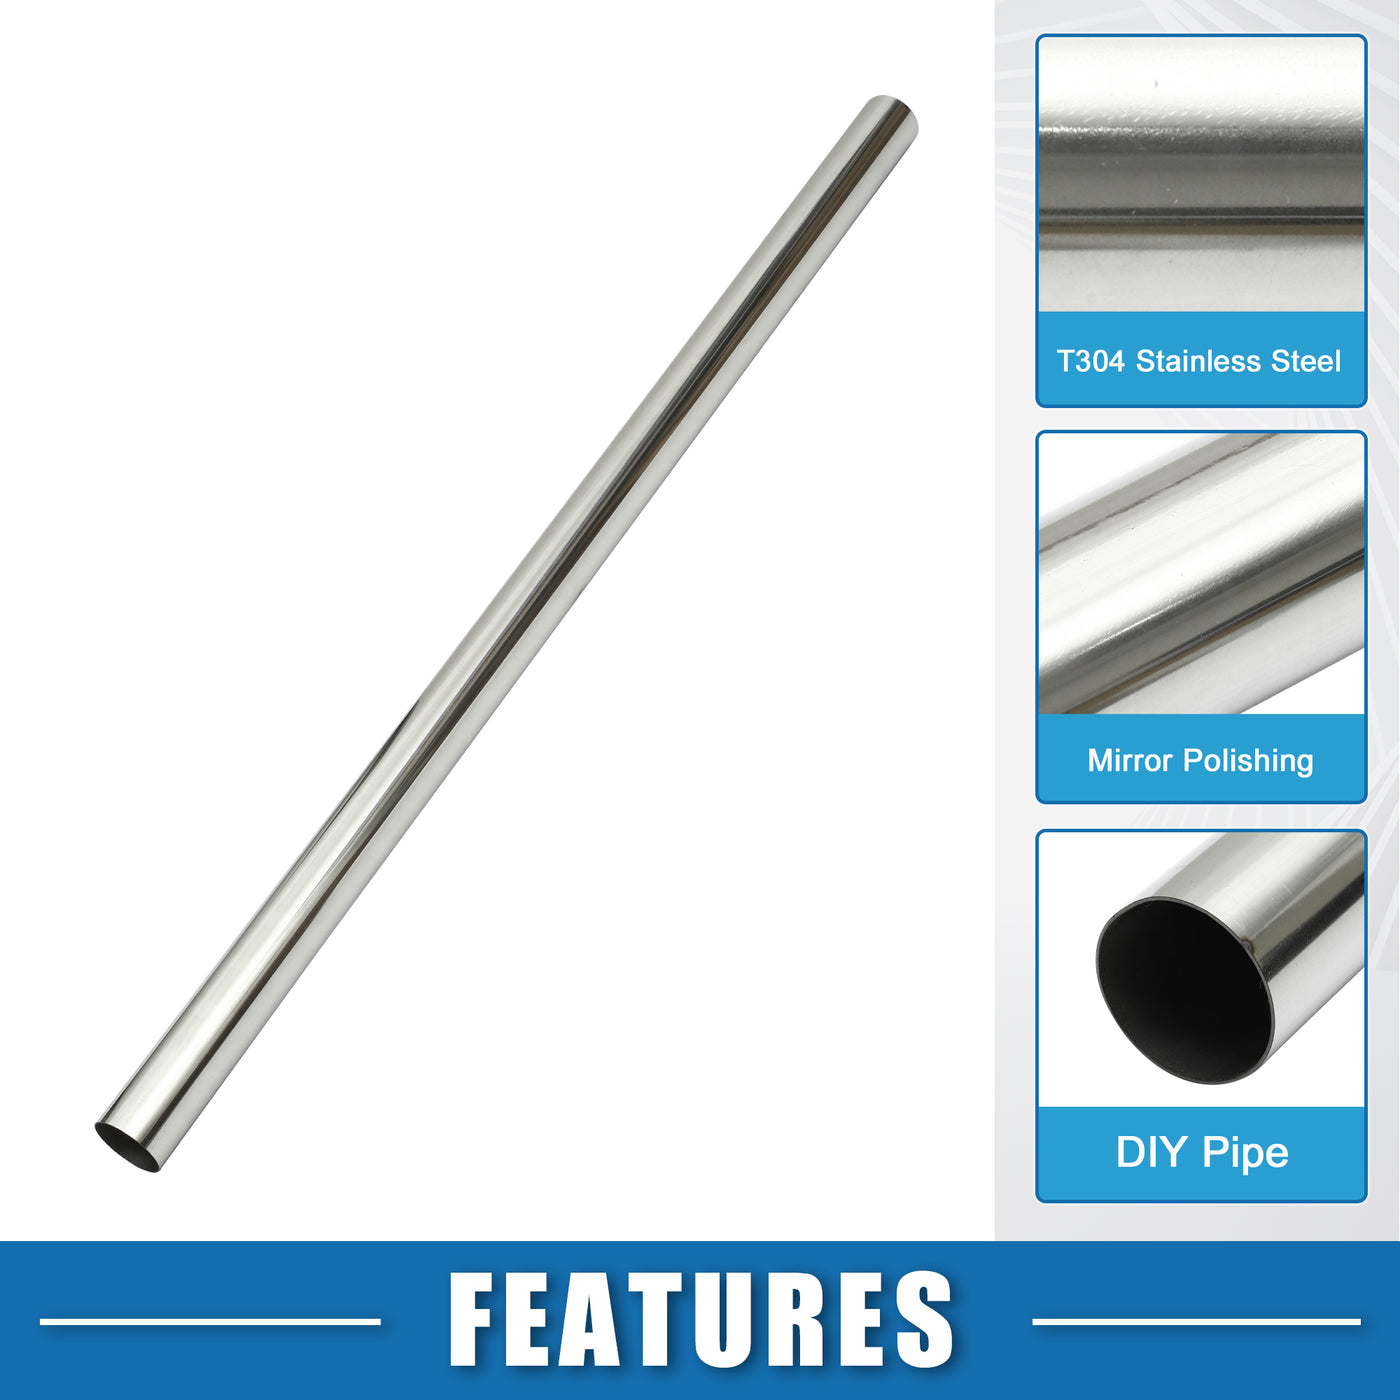 A ABSOPRO Car Mandrel Exhaust Pipe Tube Durable 48" Length 2.25'' OD Straight Exhaust Tube DIY Custom 0 Degree Modified Piping T304 Stainless Steel (Set of 2)